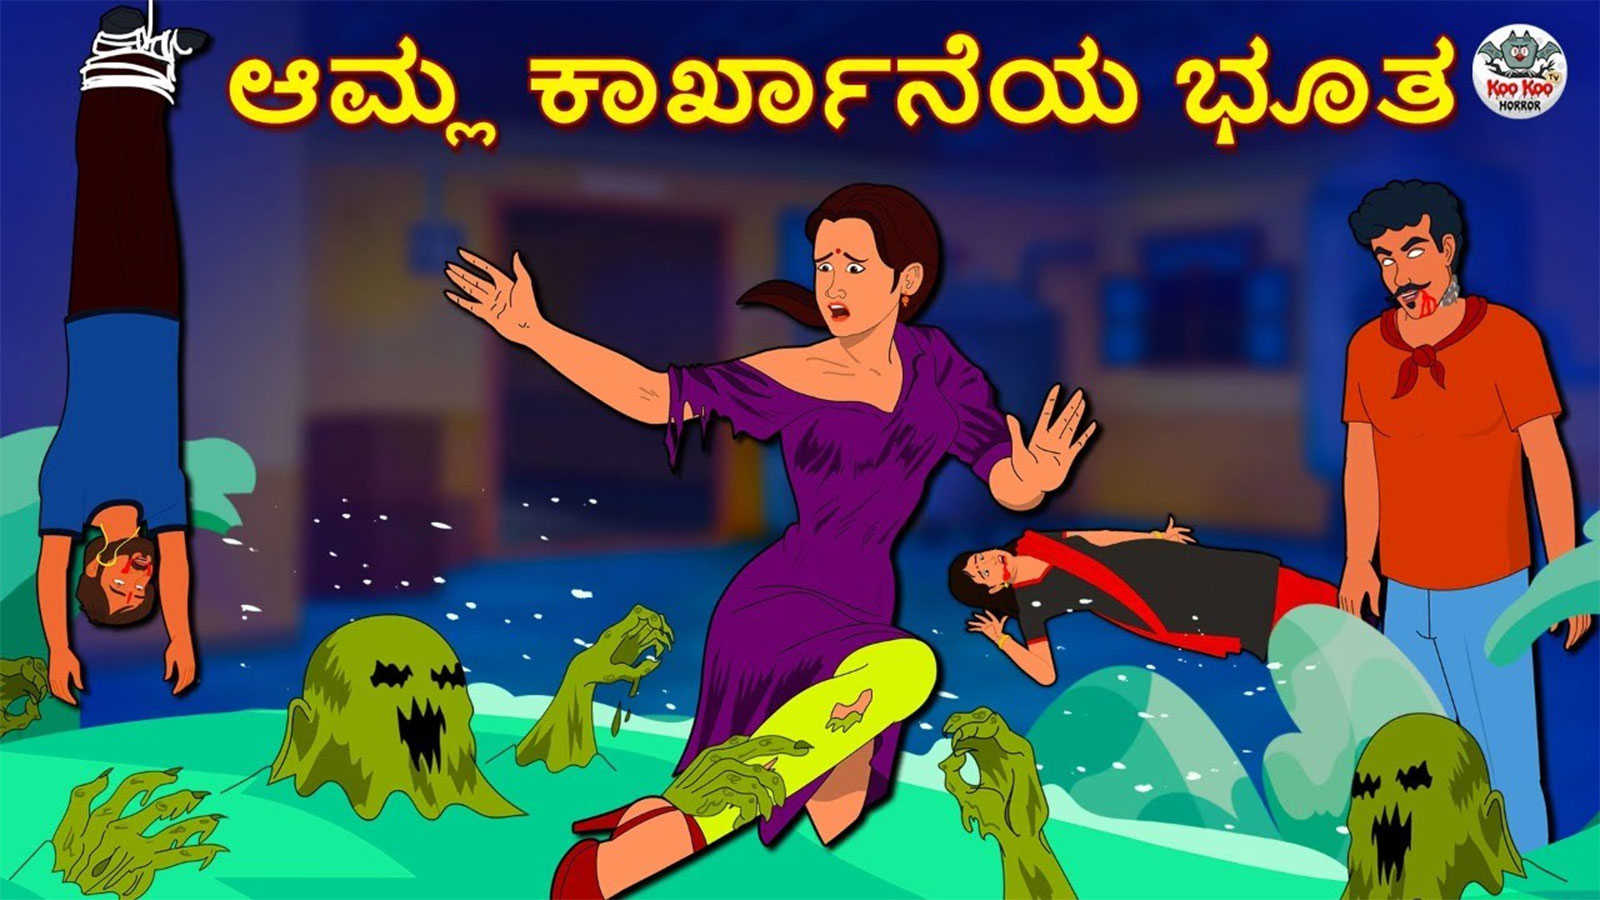 Check Out Latest Kids Kannada Nursery Horror Story 'ಆಮ್ಲ ಕಾರ್ಖಾನೆಯ ಭೂತ -  The Ghost Of The Acid Factory' for Kids - Watch Children's Nursery Stories,  Baby Songs, Fairy Tales In Kannada |